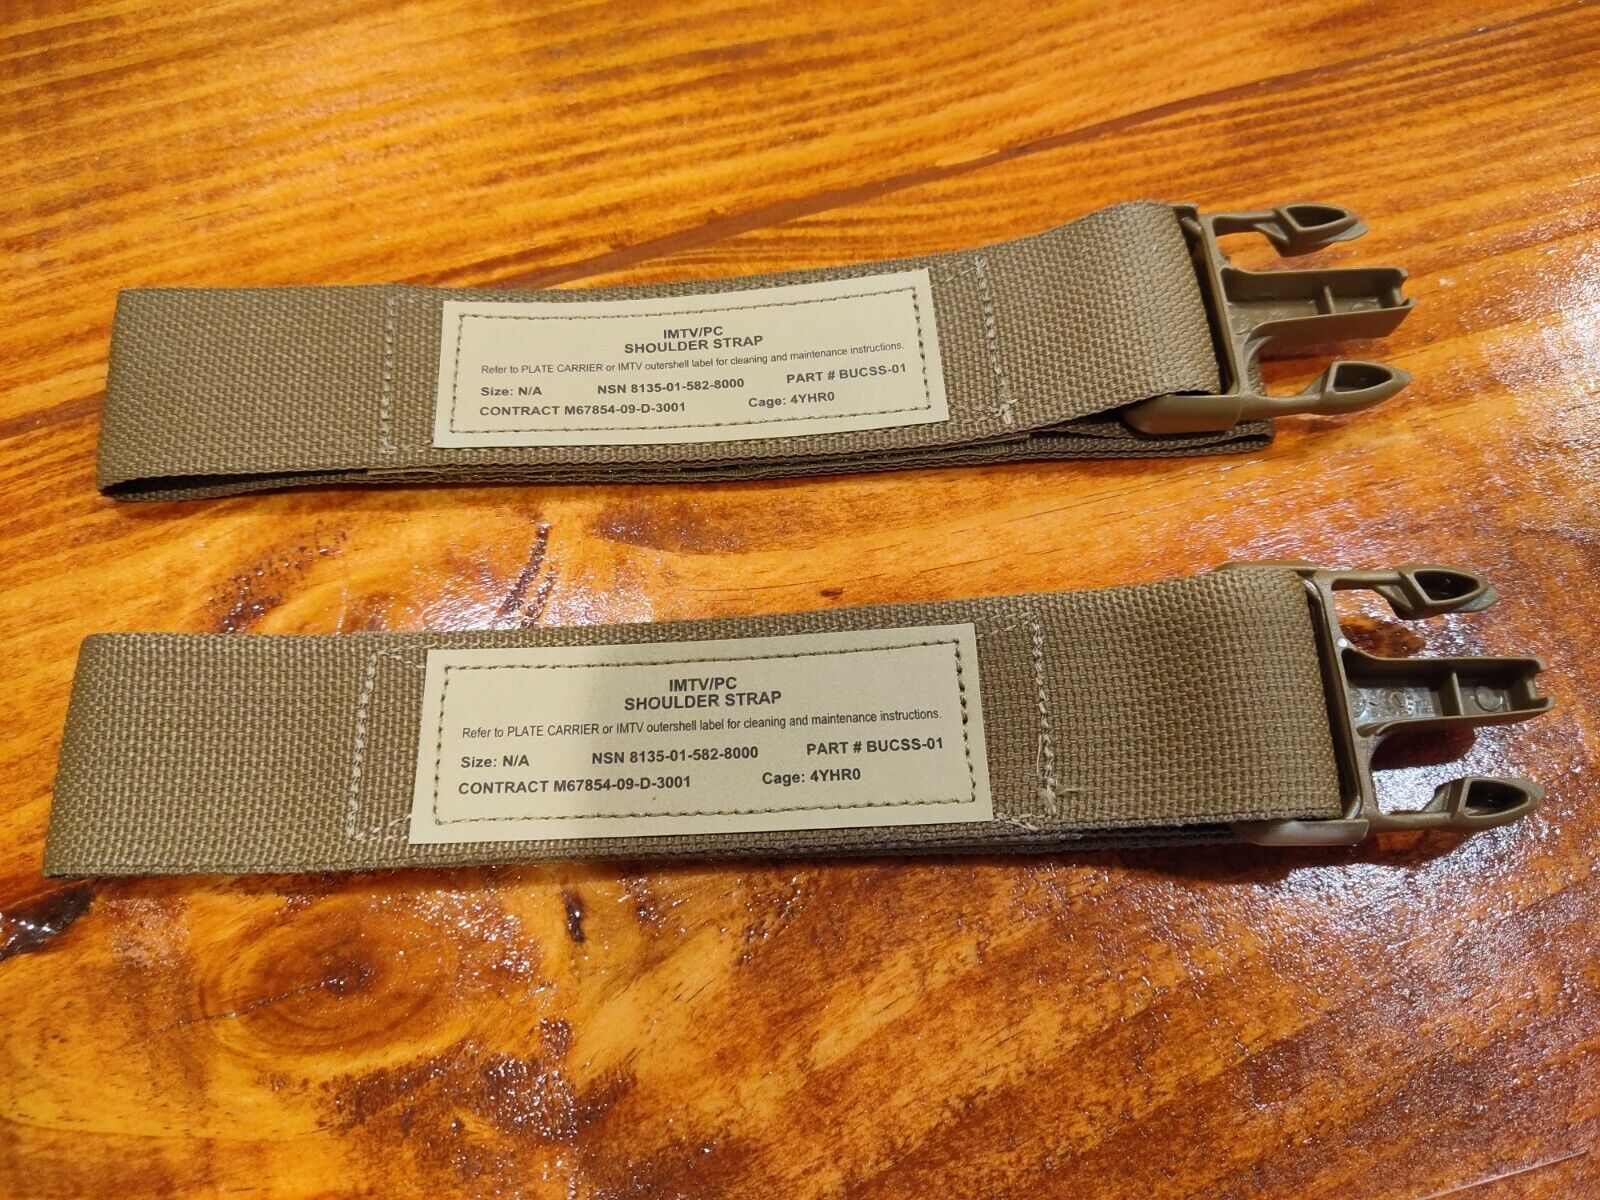 USMC IMTV / PC SHOULDER STRAP with Male Buckle for Plate Carrier Vest NEW Qty 10